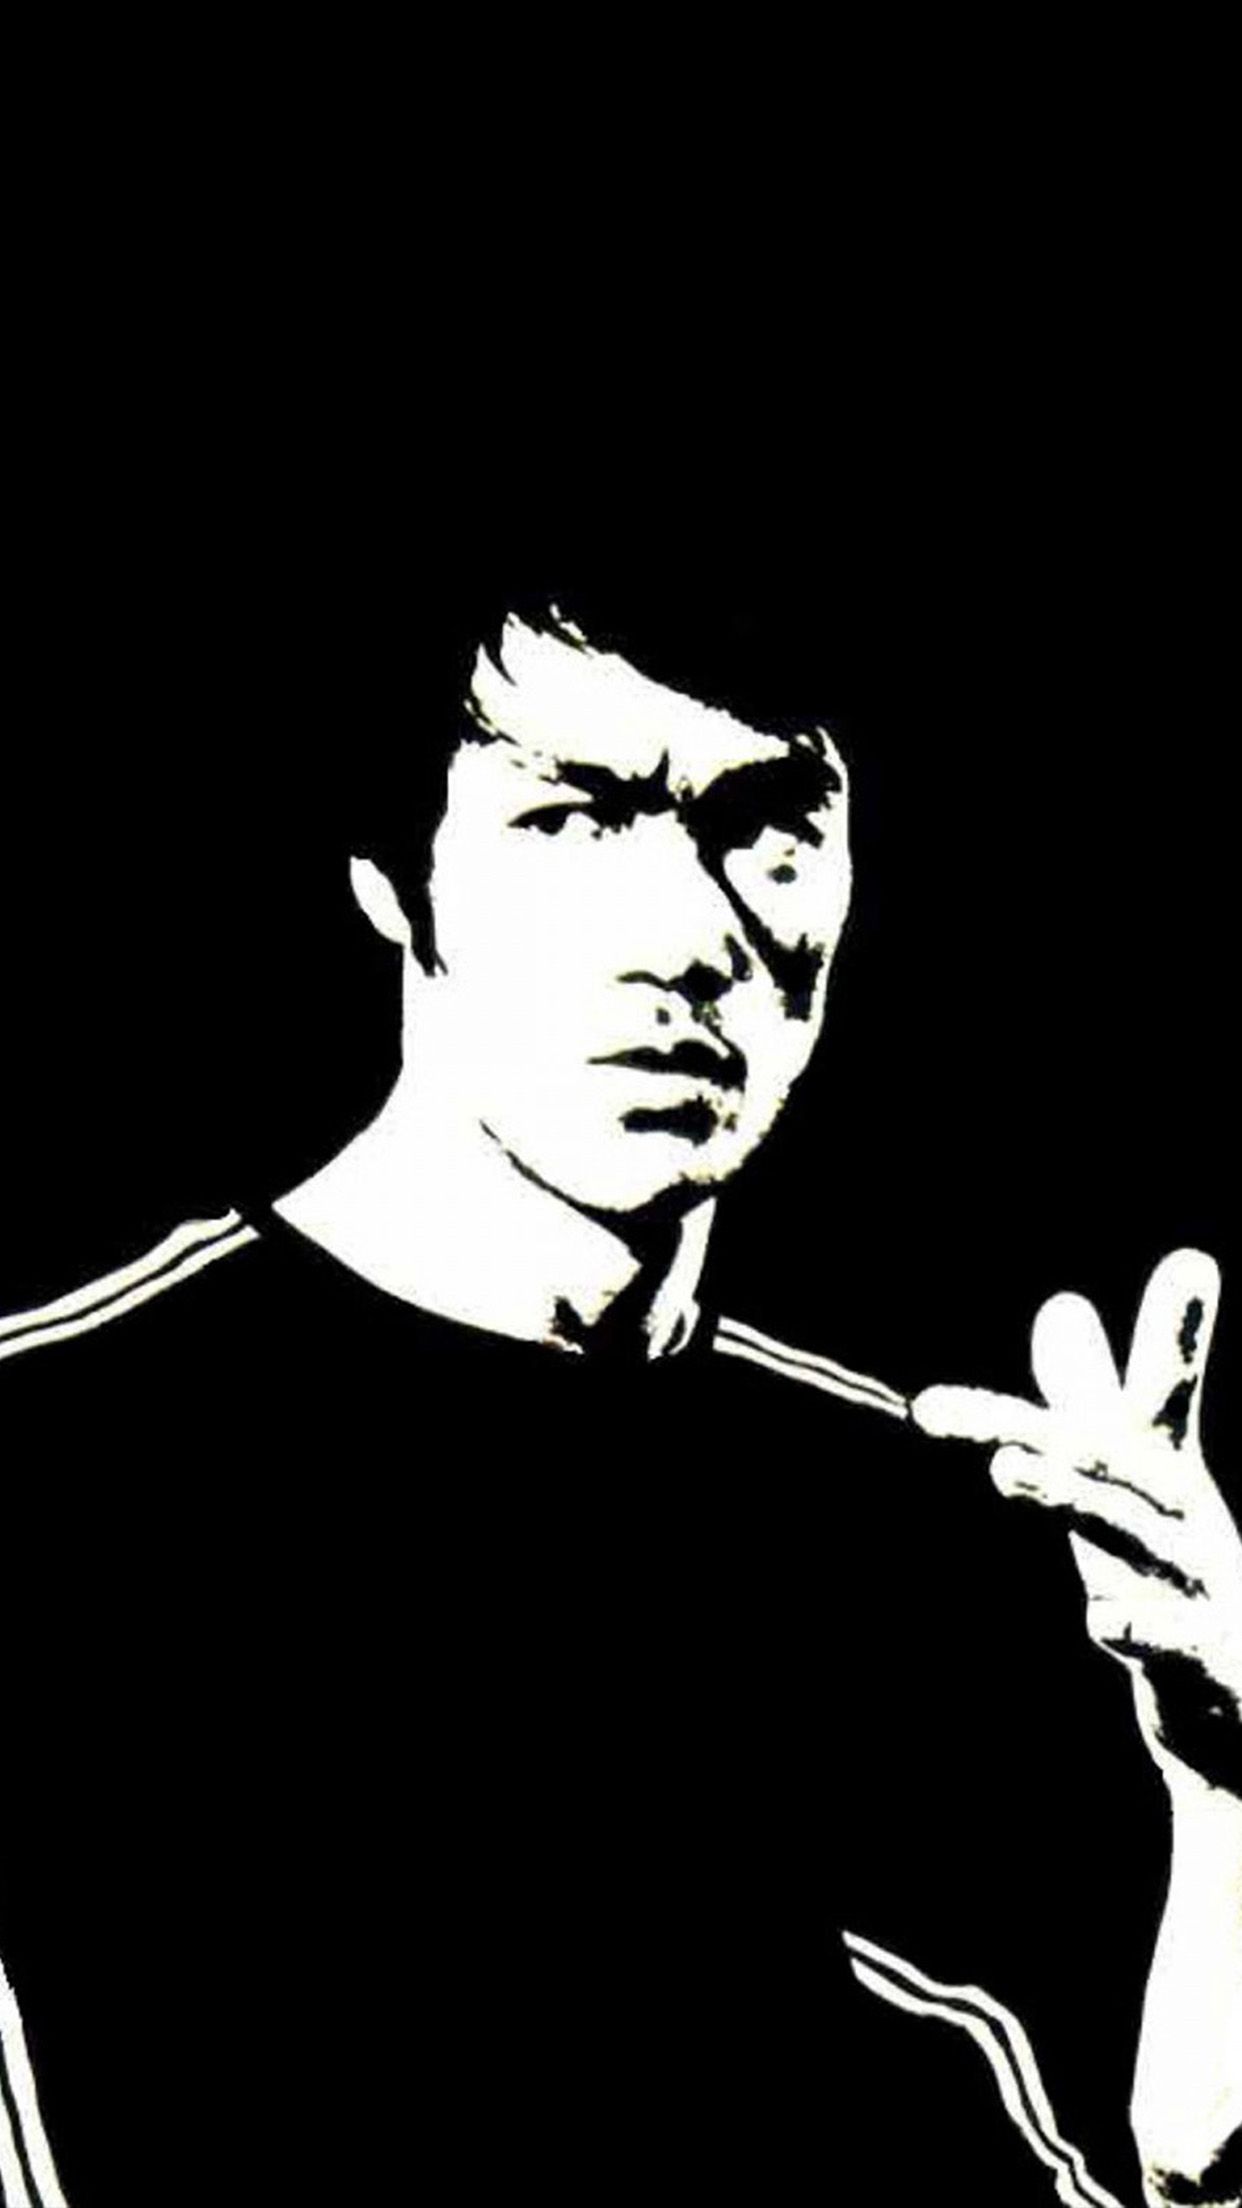 Bruce Lee iPhone Wallpaper Free Bruce Lee iPhone Background